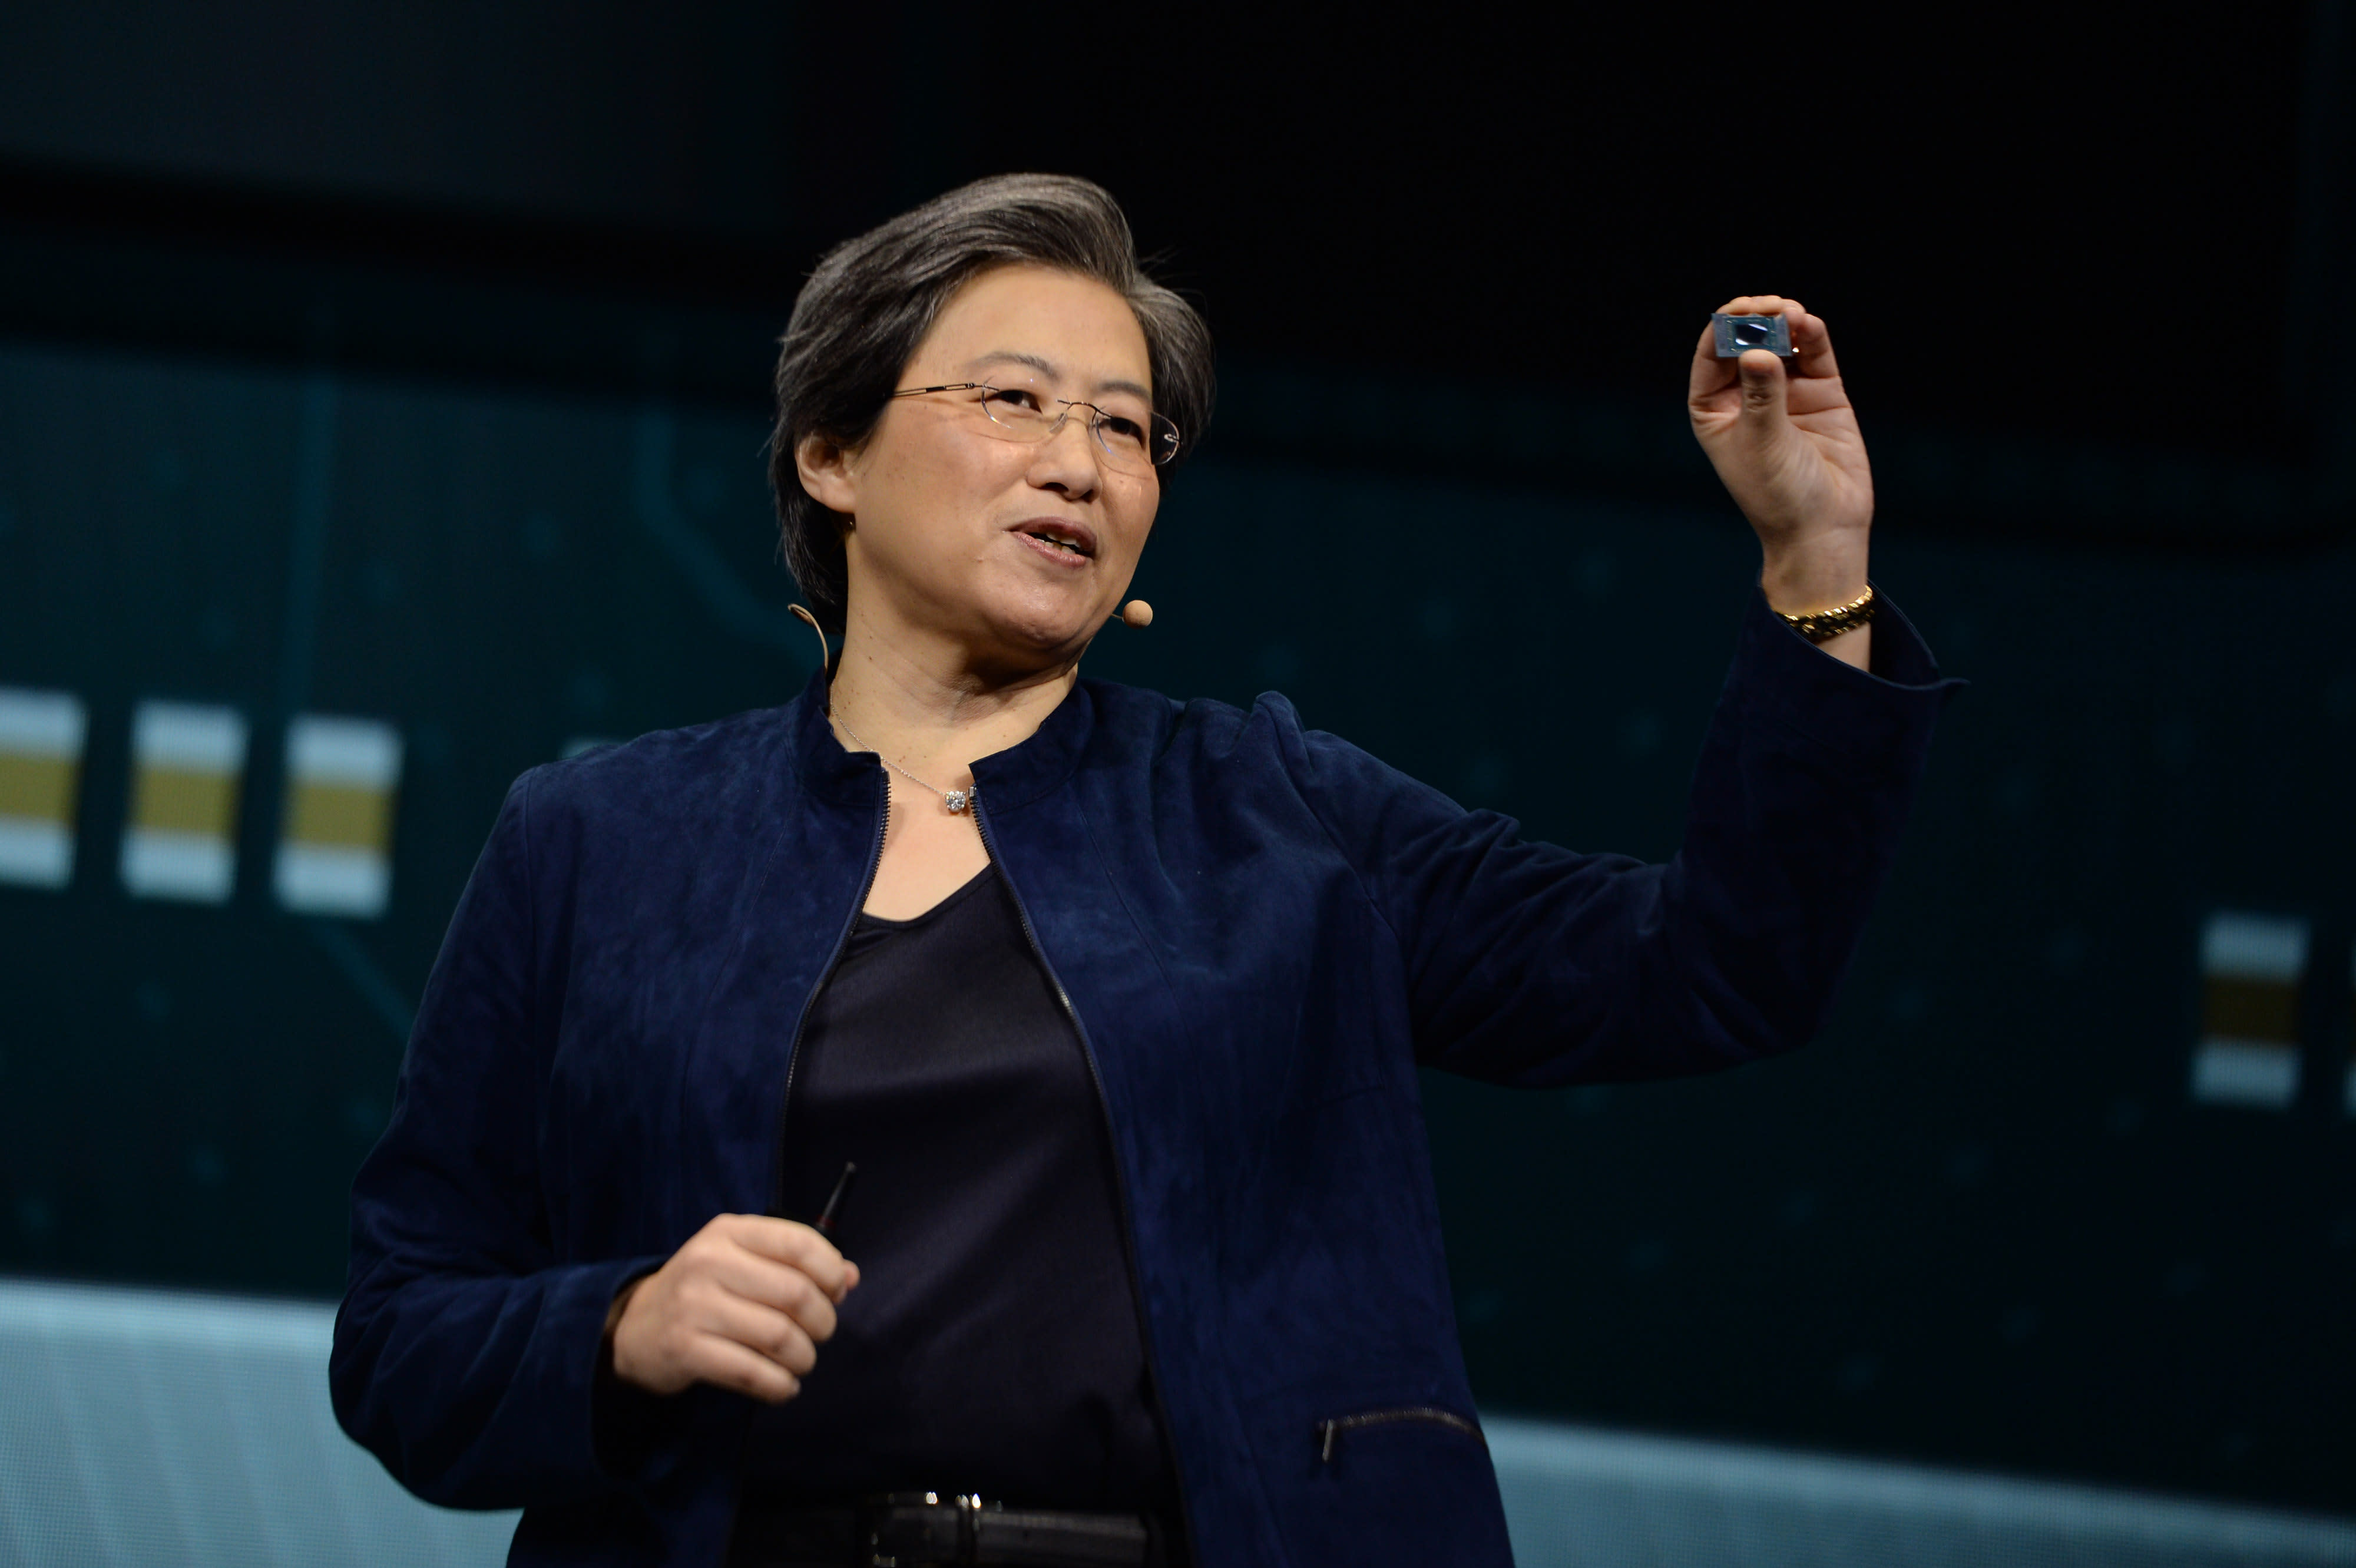 AMD delivers a Q4 beat amid industry headwinds, confirming the Club investment case